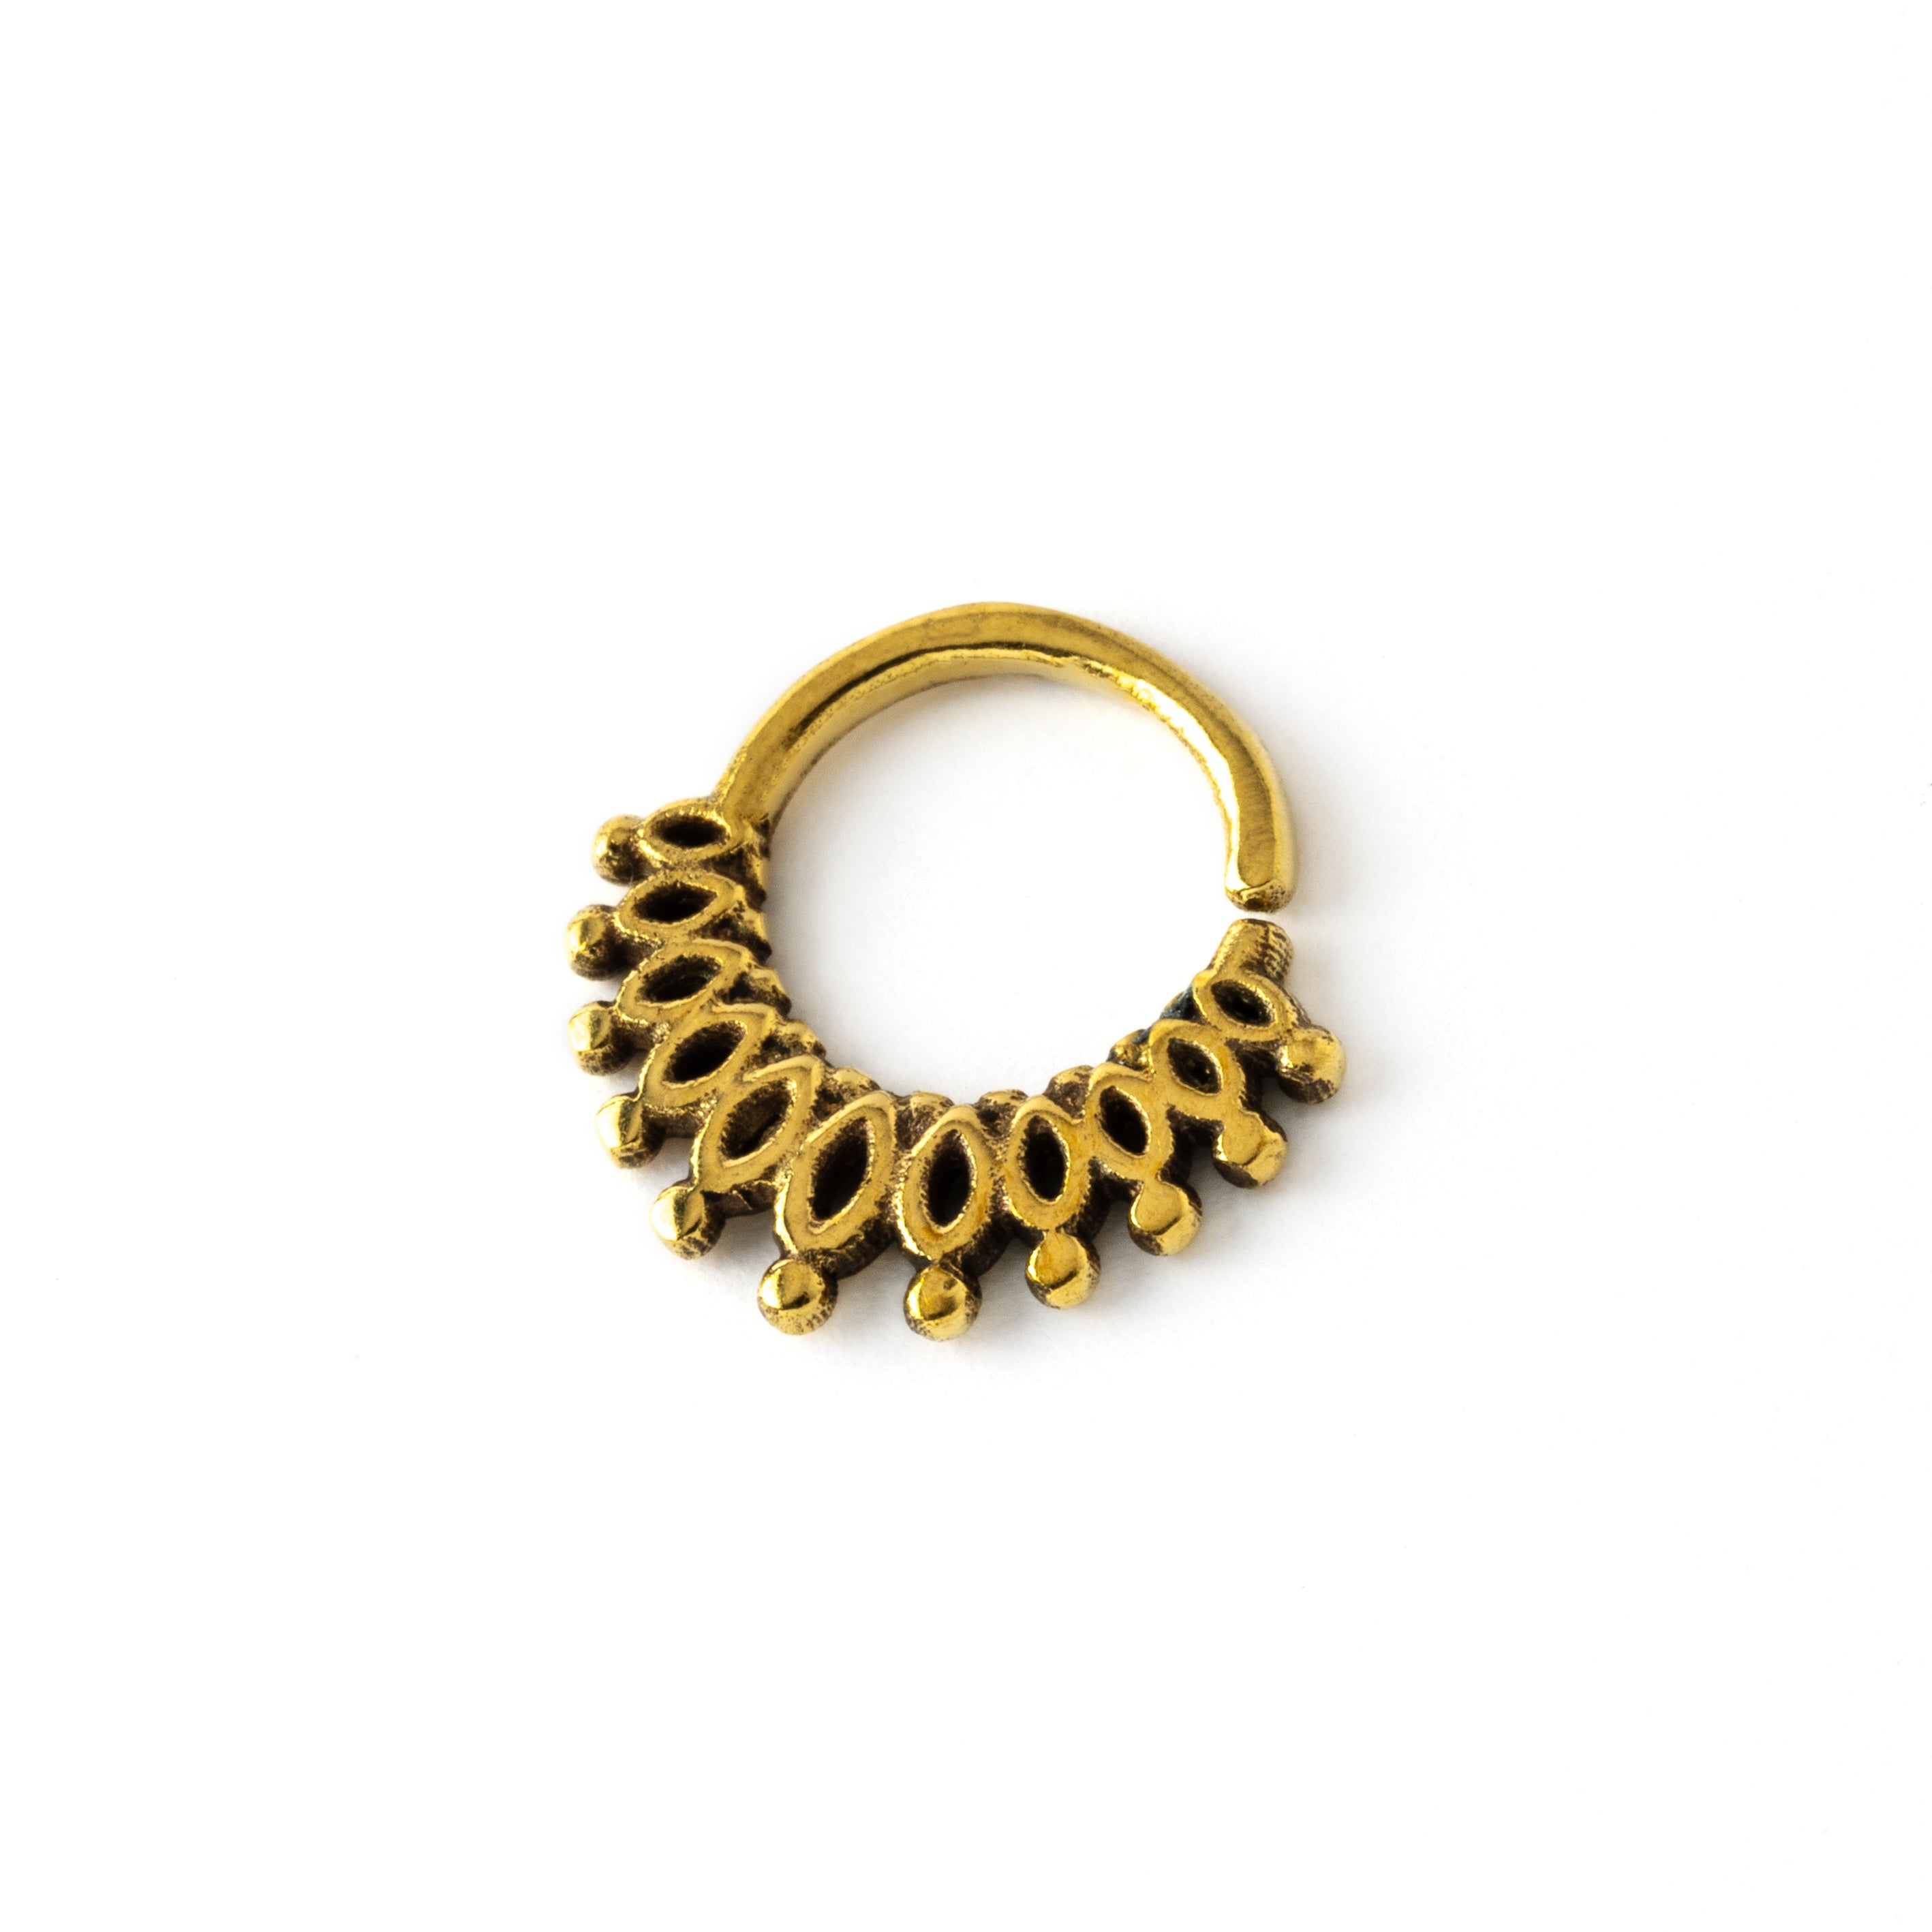 antique gold colour boho tribal septum ring ornamented with petals side view